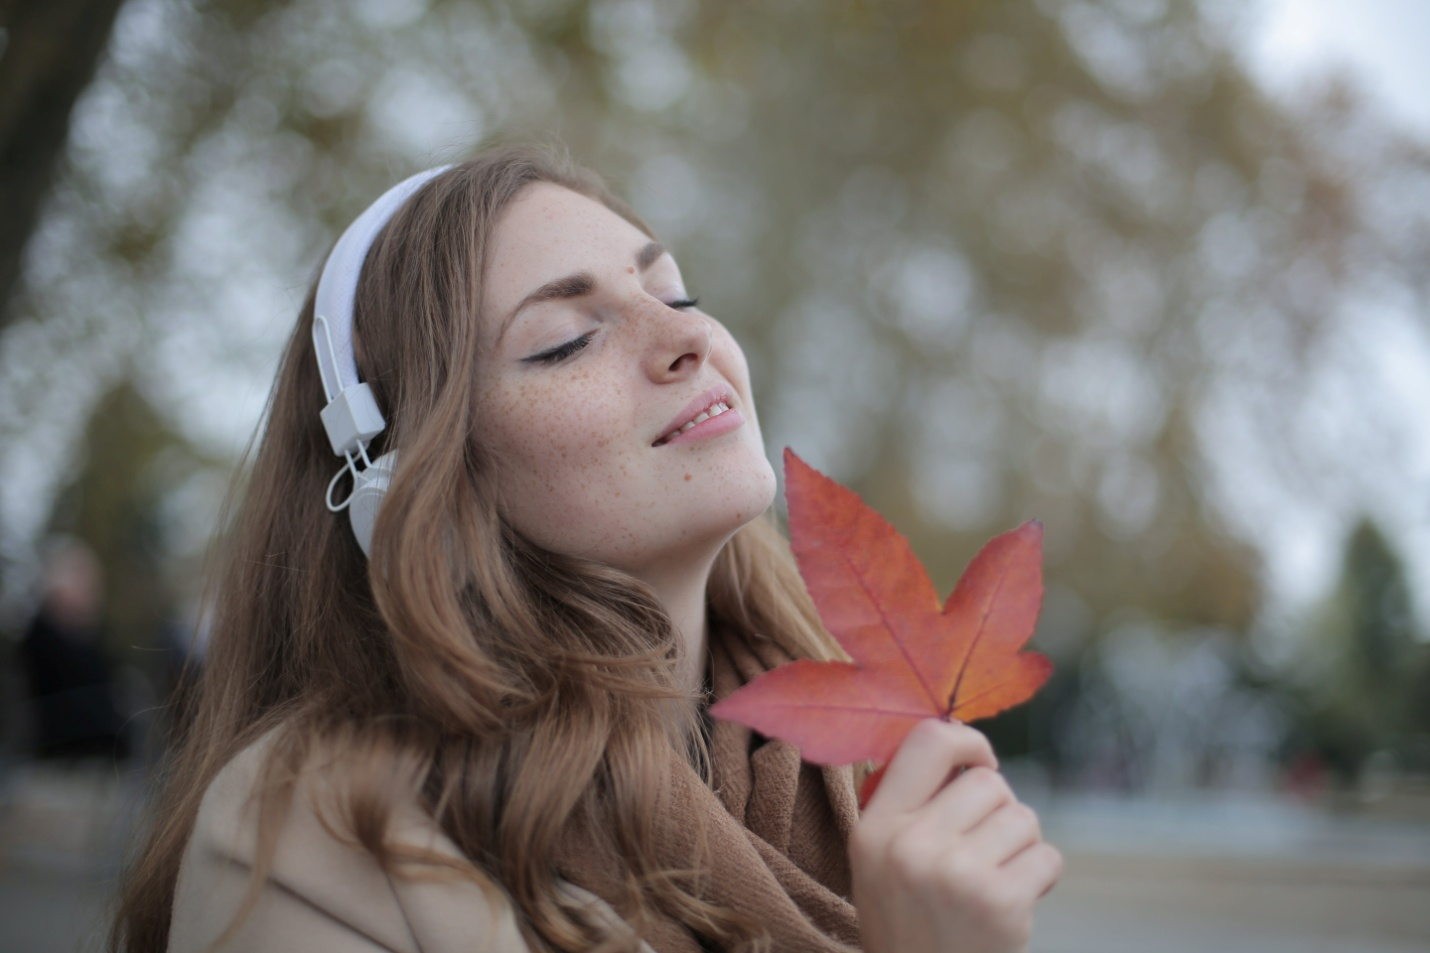 A woman wearing headphones is holding a brown leaf